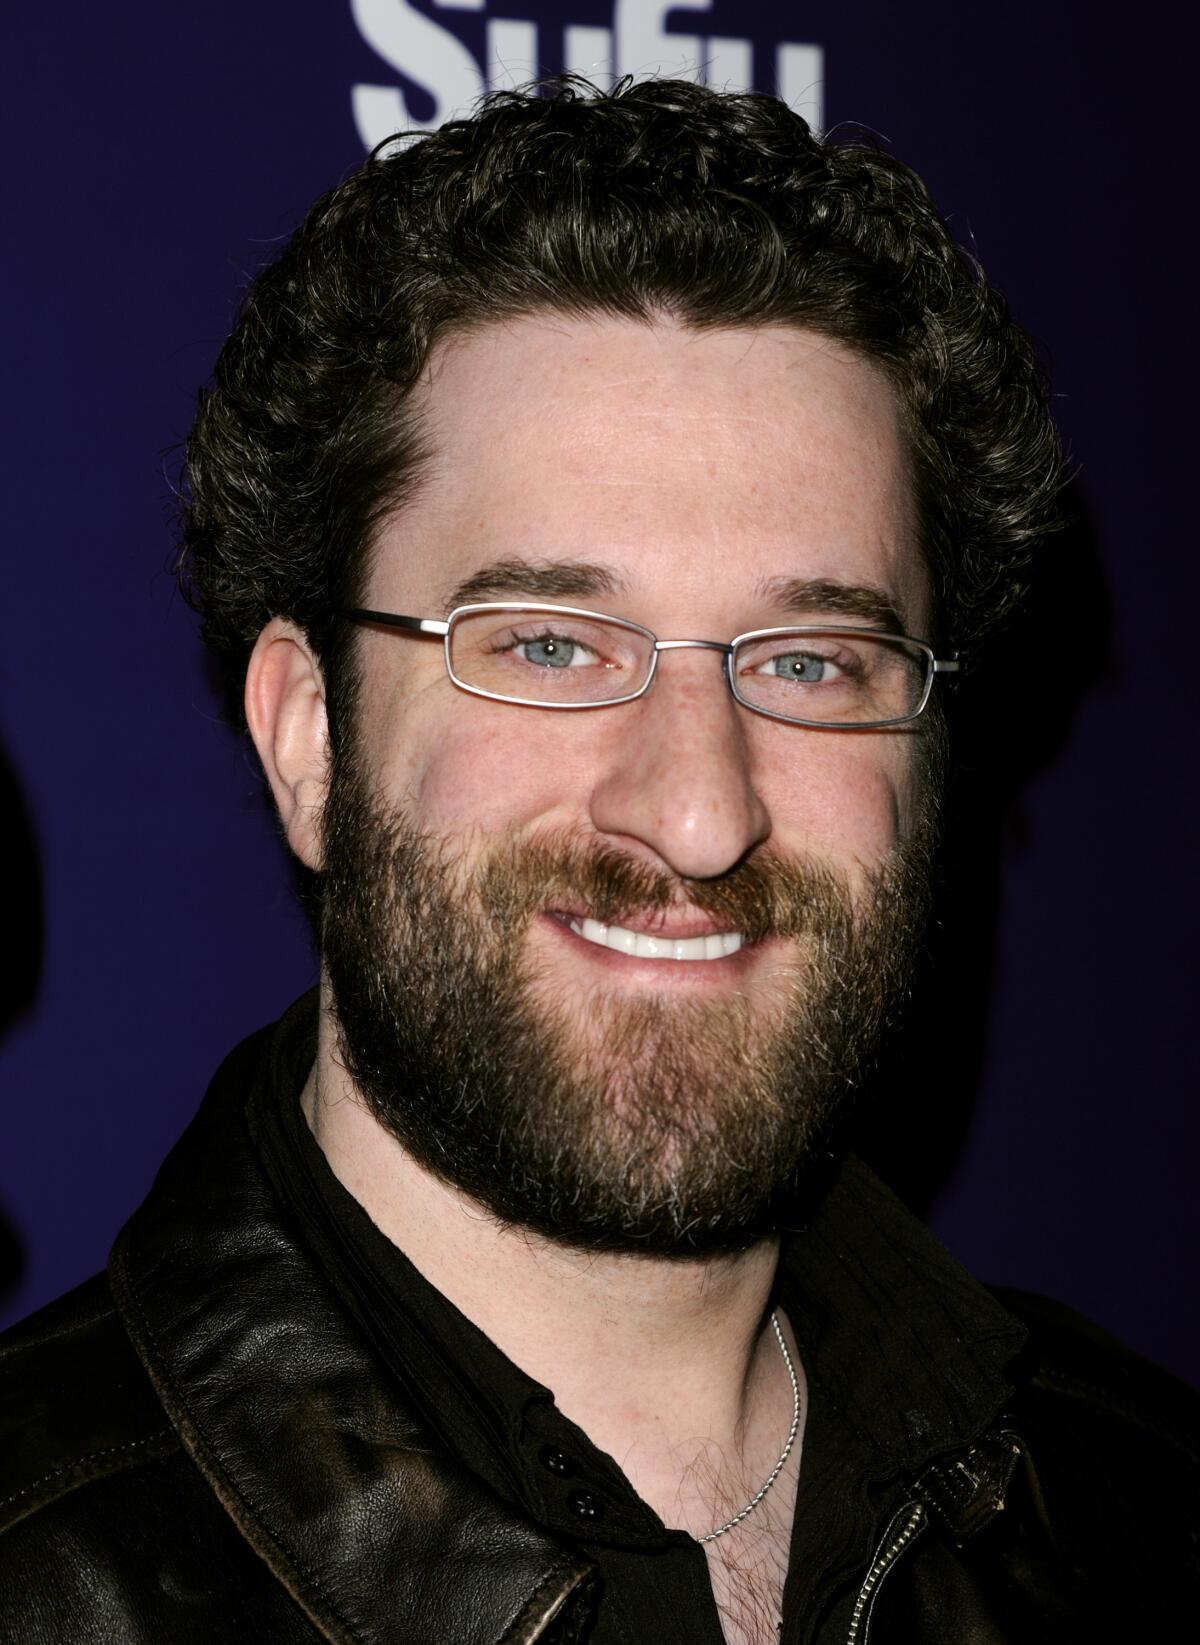 Actor Dustin Diamond smiles for the camera in 2011